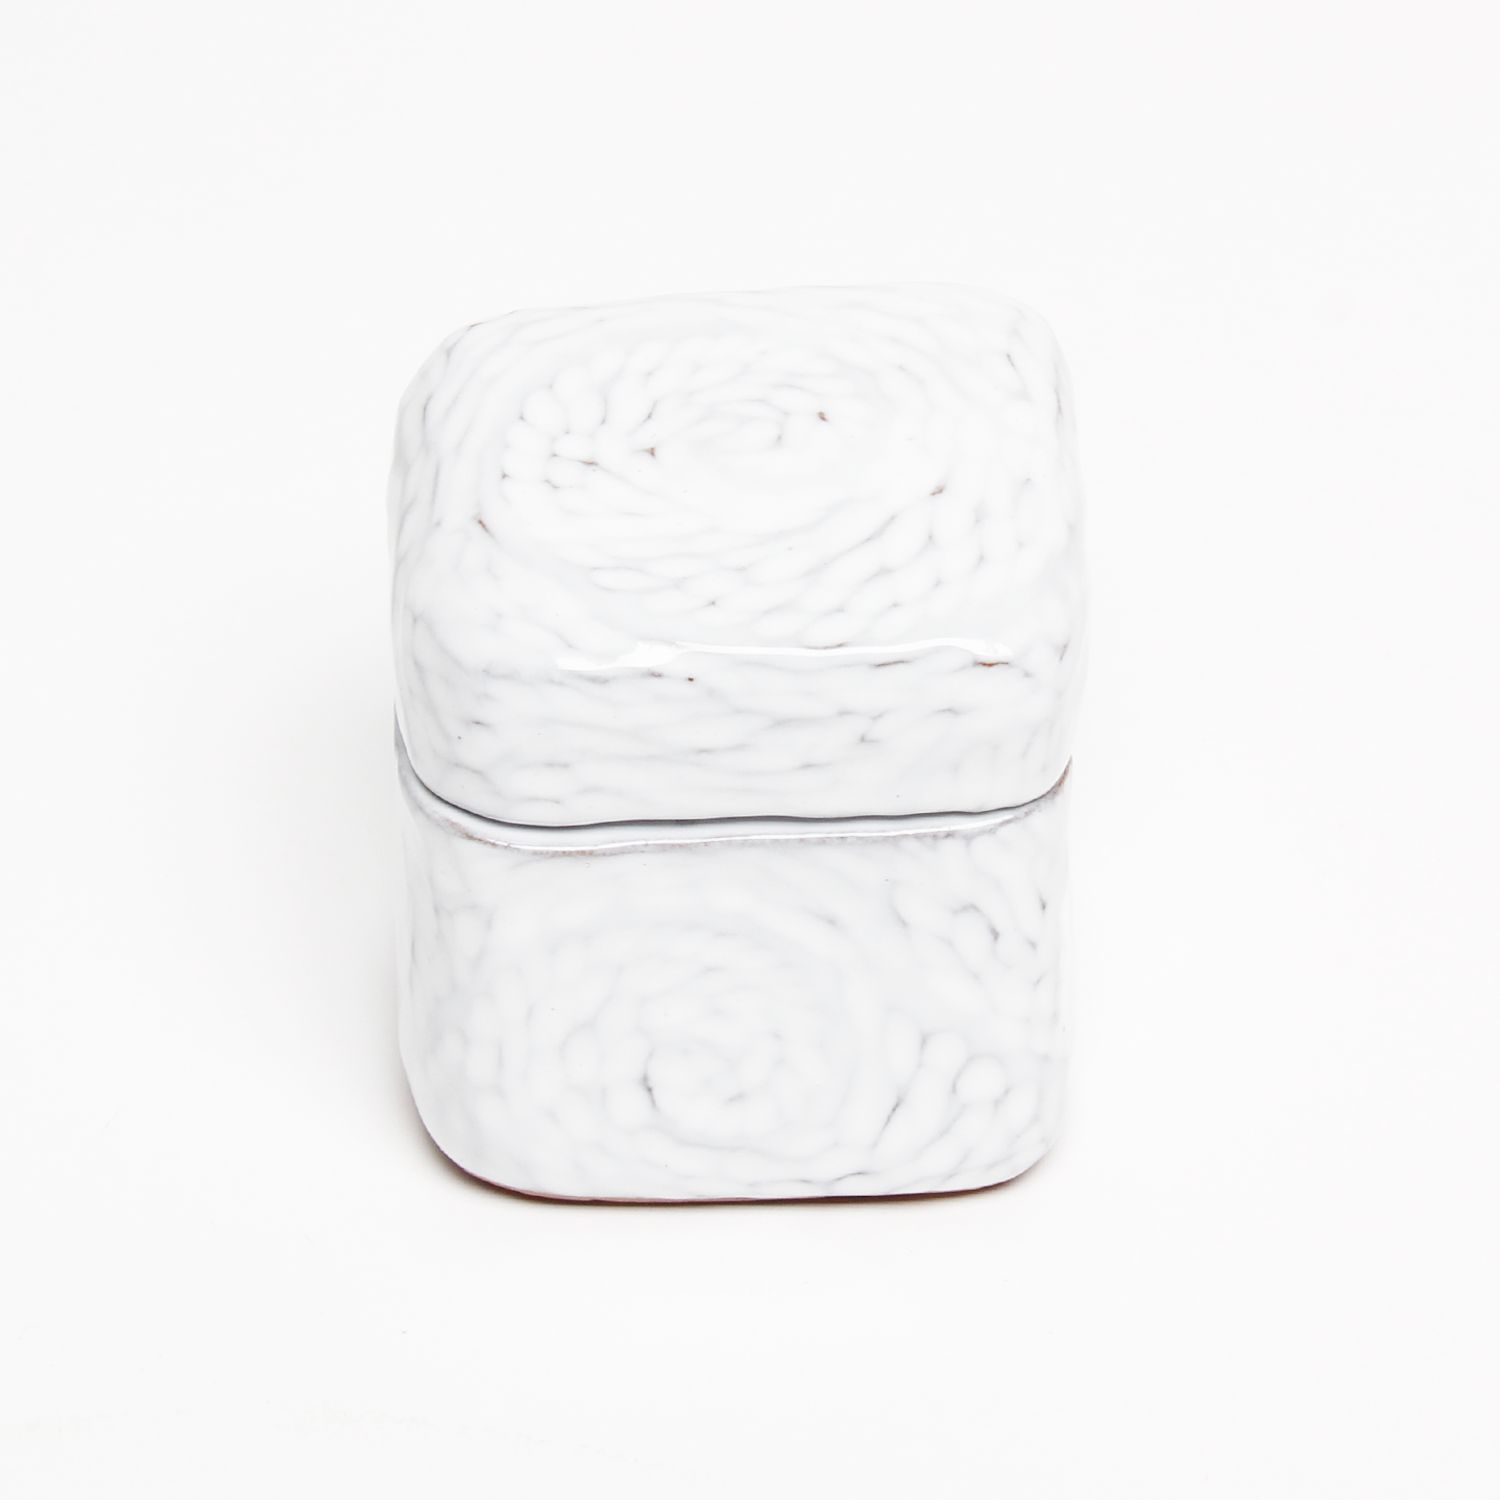 Jacquie Blondin: Cube Container Product Image 3 of 3